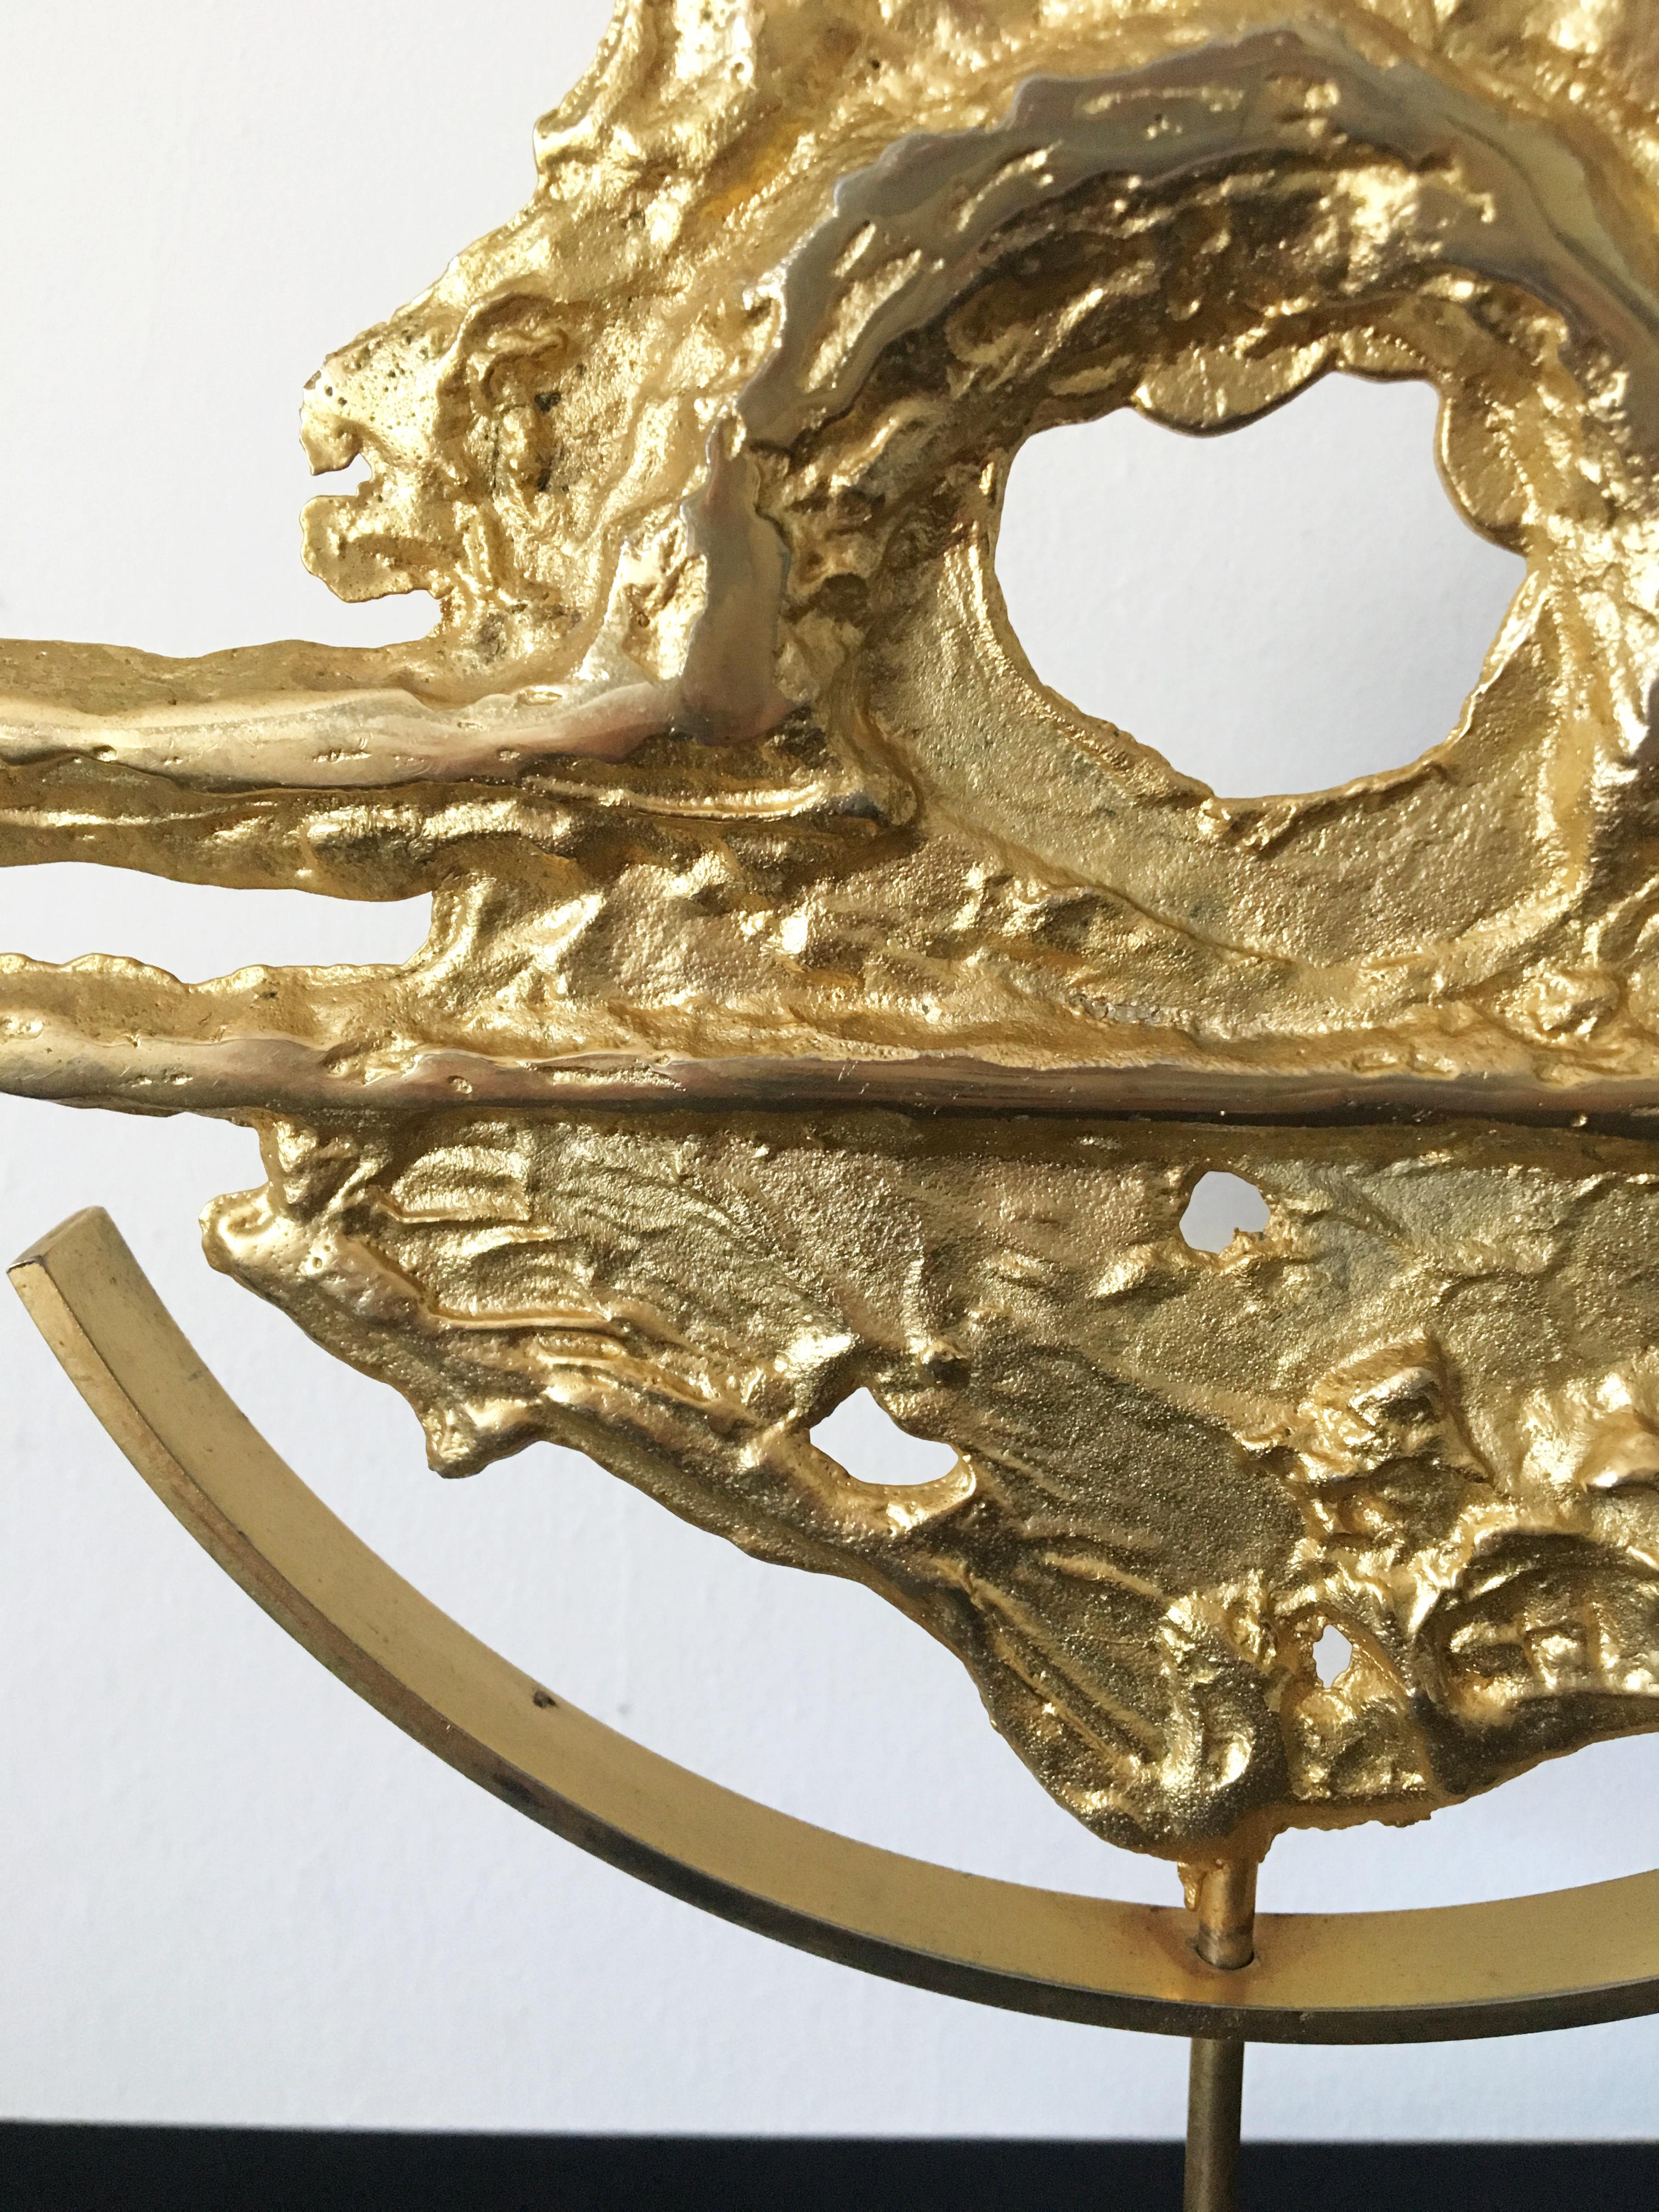 Brutalist Philippe Cheverny Libra Zodiac Sculpture Signed, Gilded Cast Metal For Sale